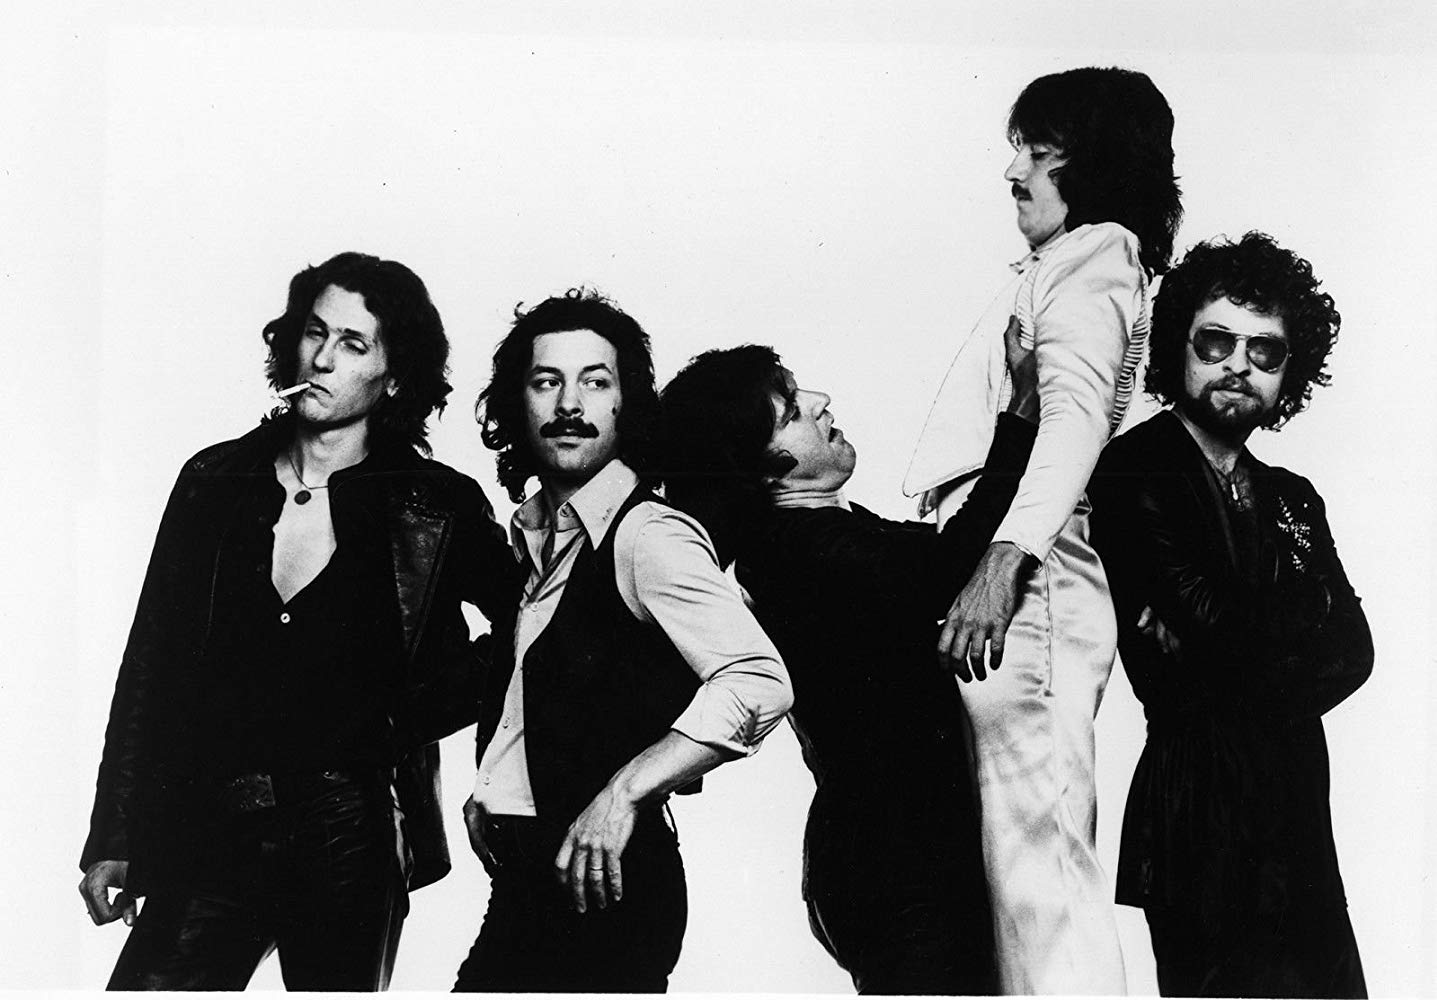 It starts with a birthstone...: Songs About People # 878 Blue Oyster Cult